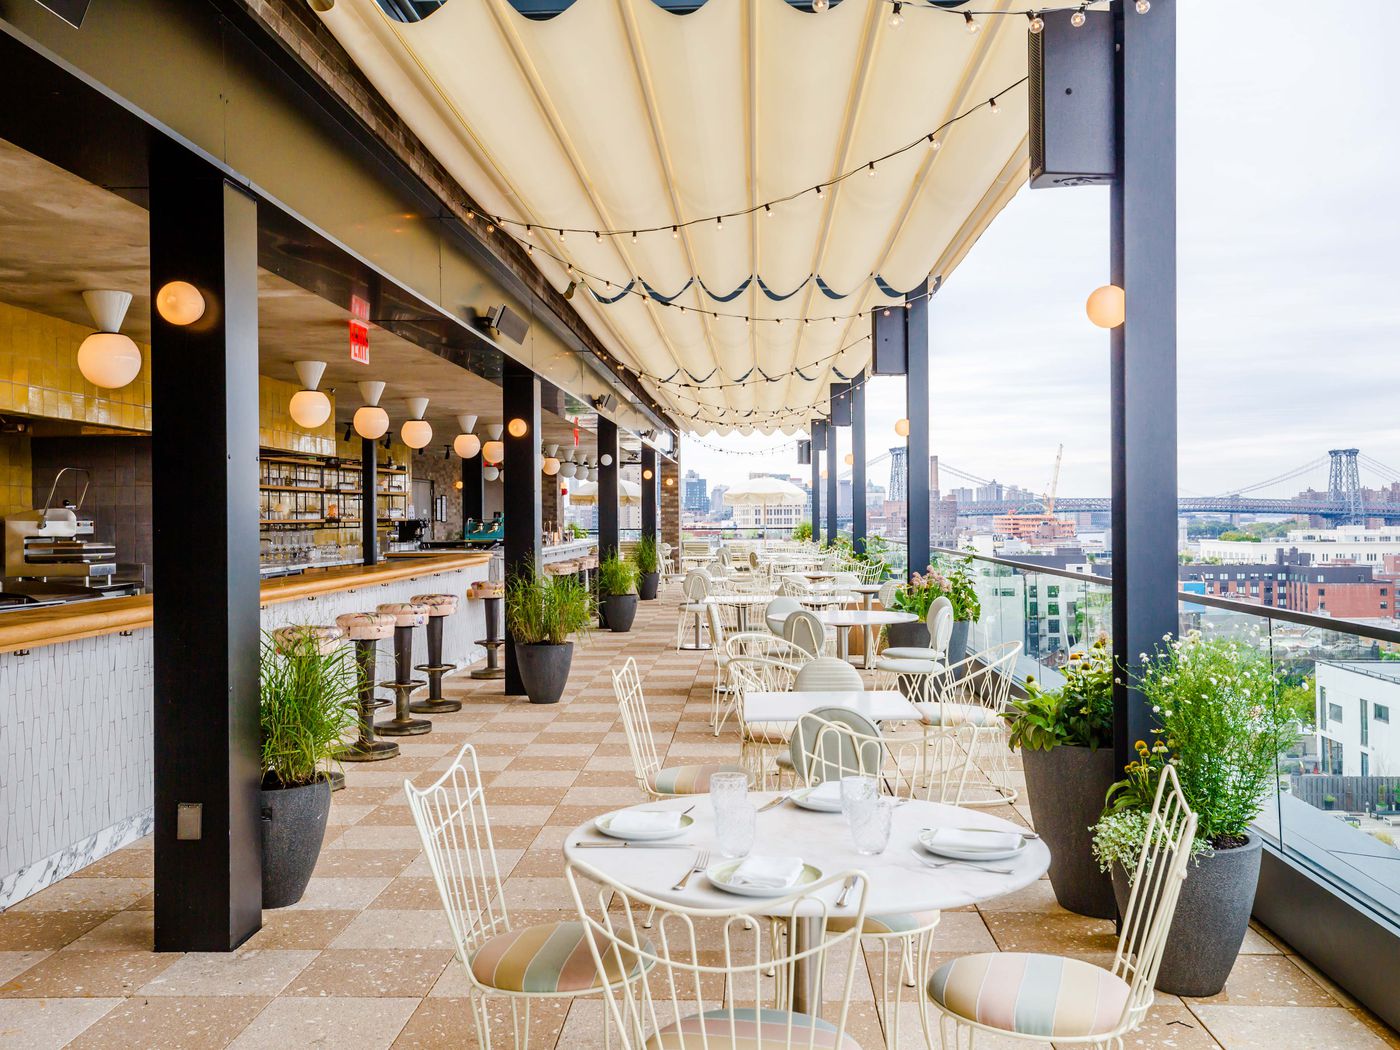 Summerly Opens on the Hoxton's Rooftop in Williamsburg Today - Eater NY